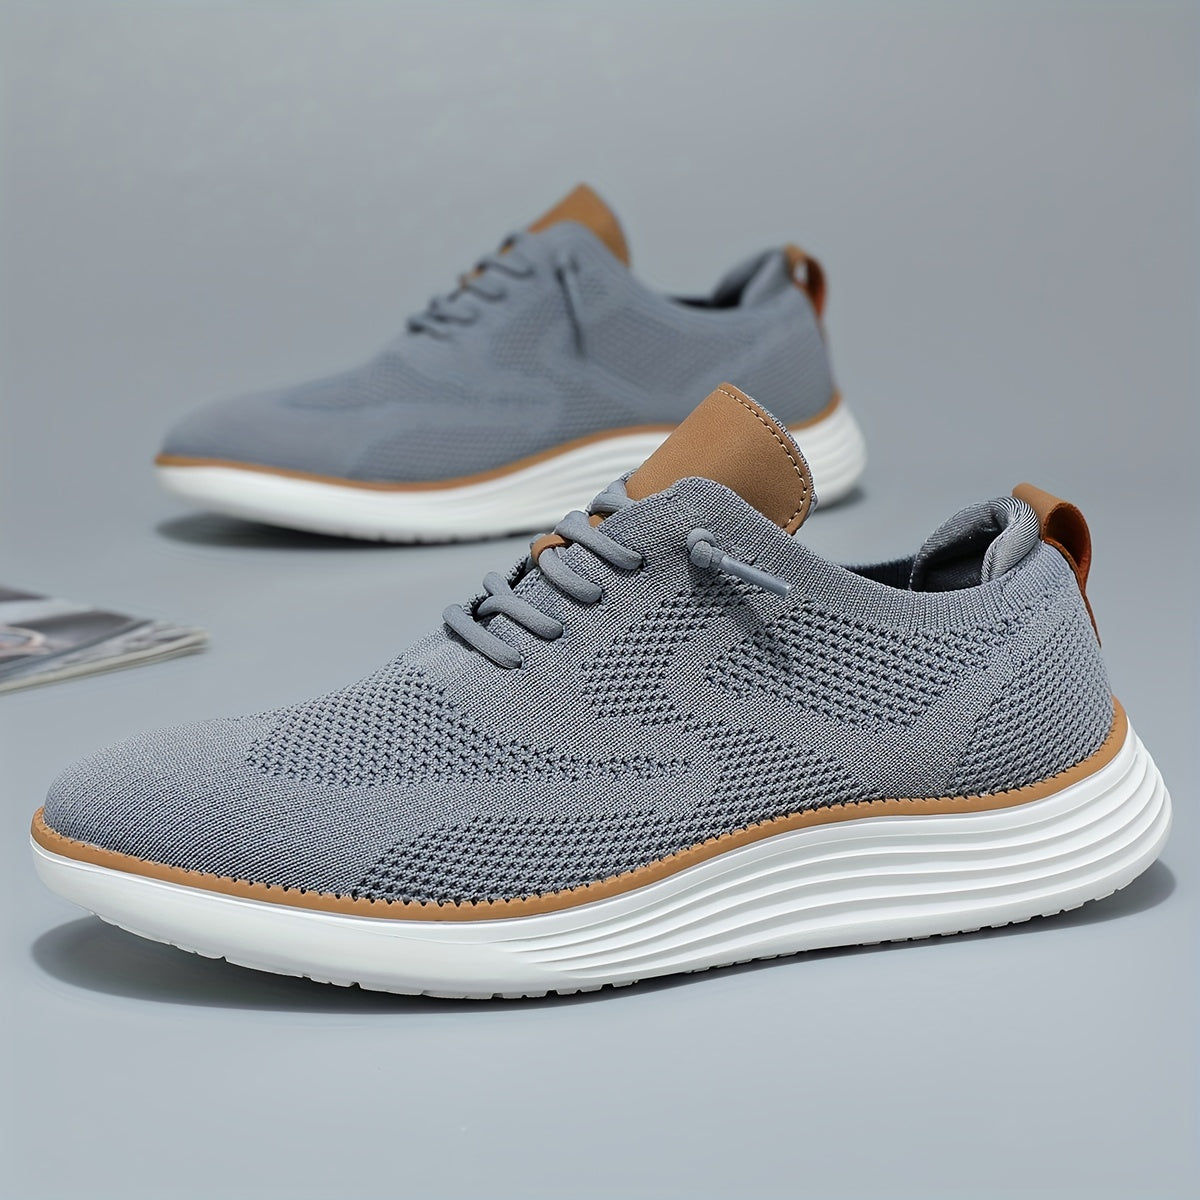 Men's Lightweight Sneakers - Athletic Shoes - Breathable Lace-ups